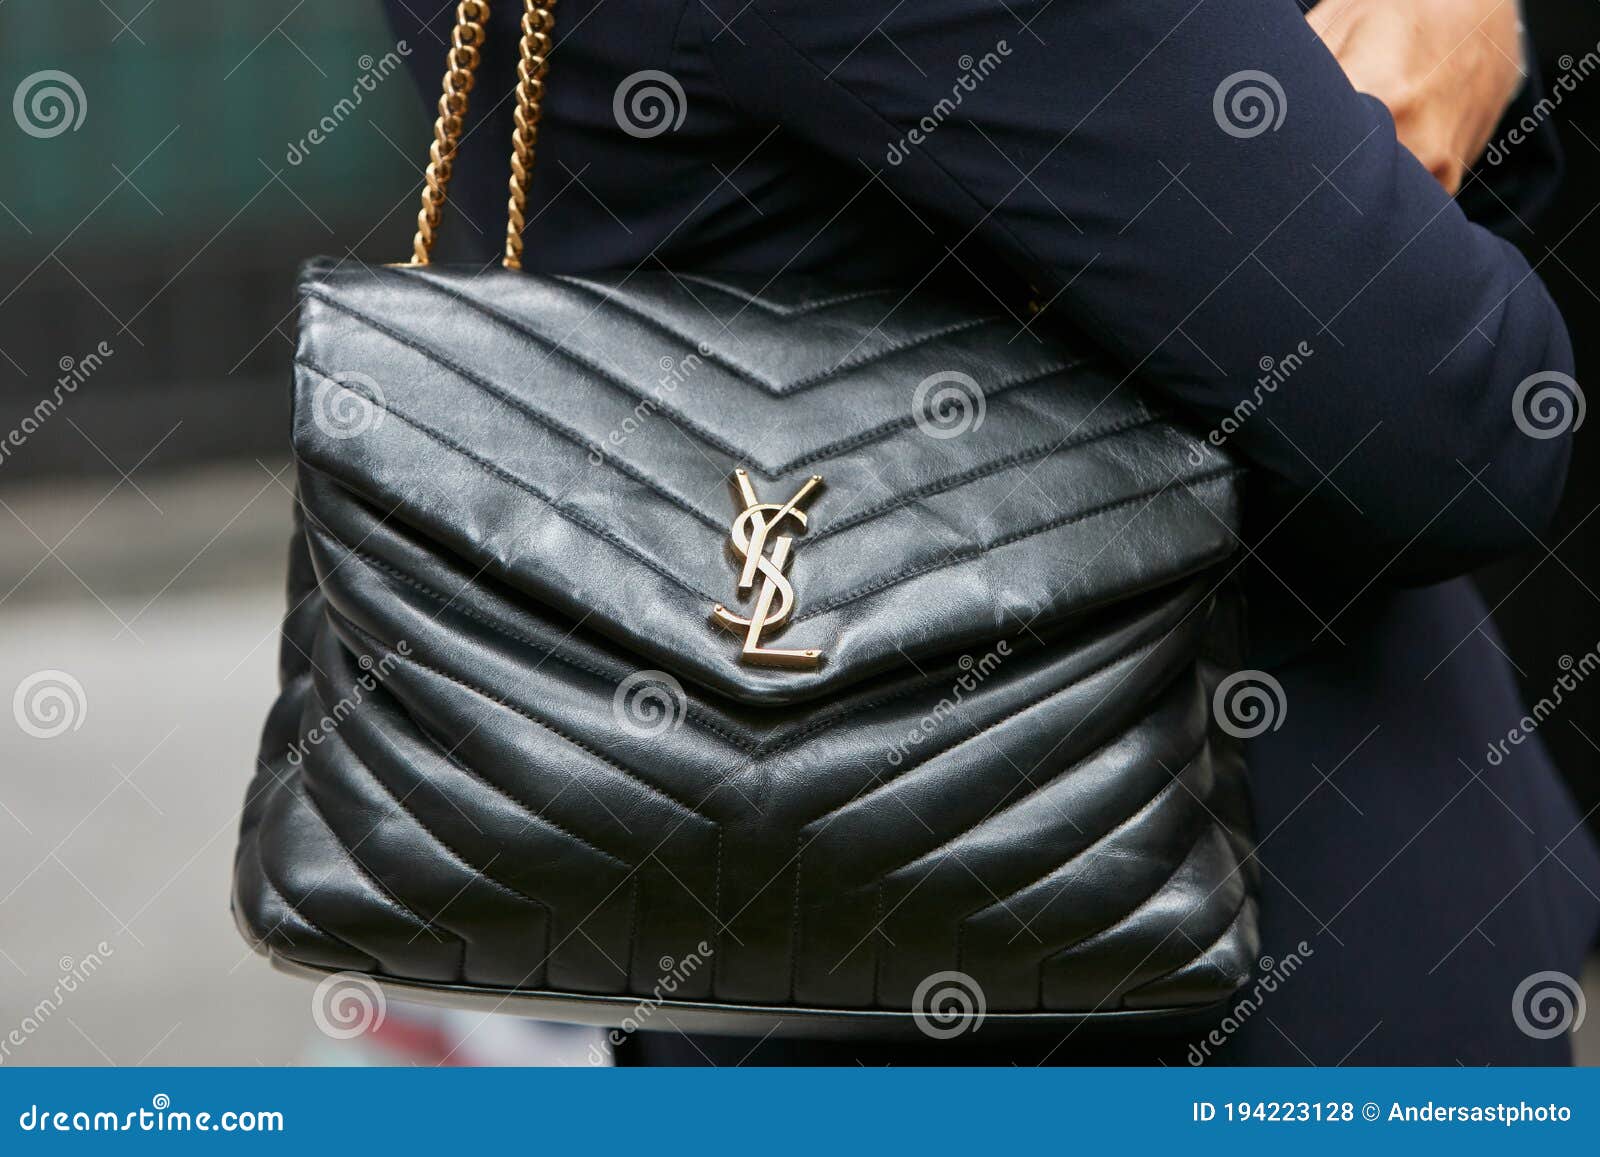 Woman with Black Leather Yves Saint Laurent Bag before Emporio Armani  Fashion Show, Milan Editorial Stock Photo - Image of yves, elegant:  194223128